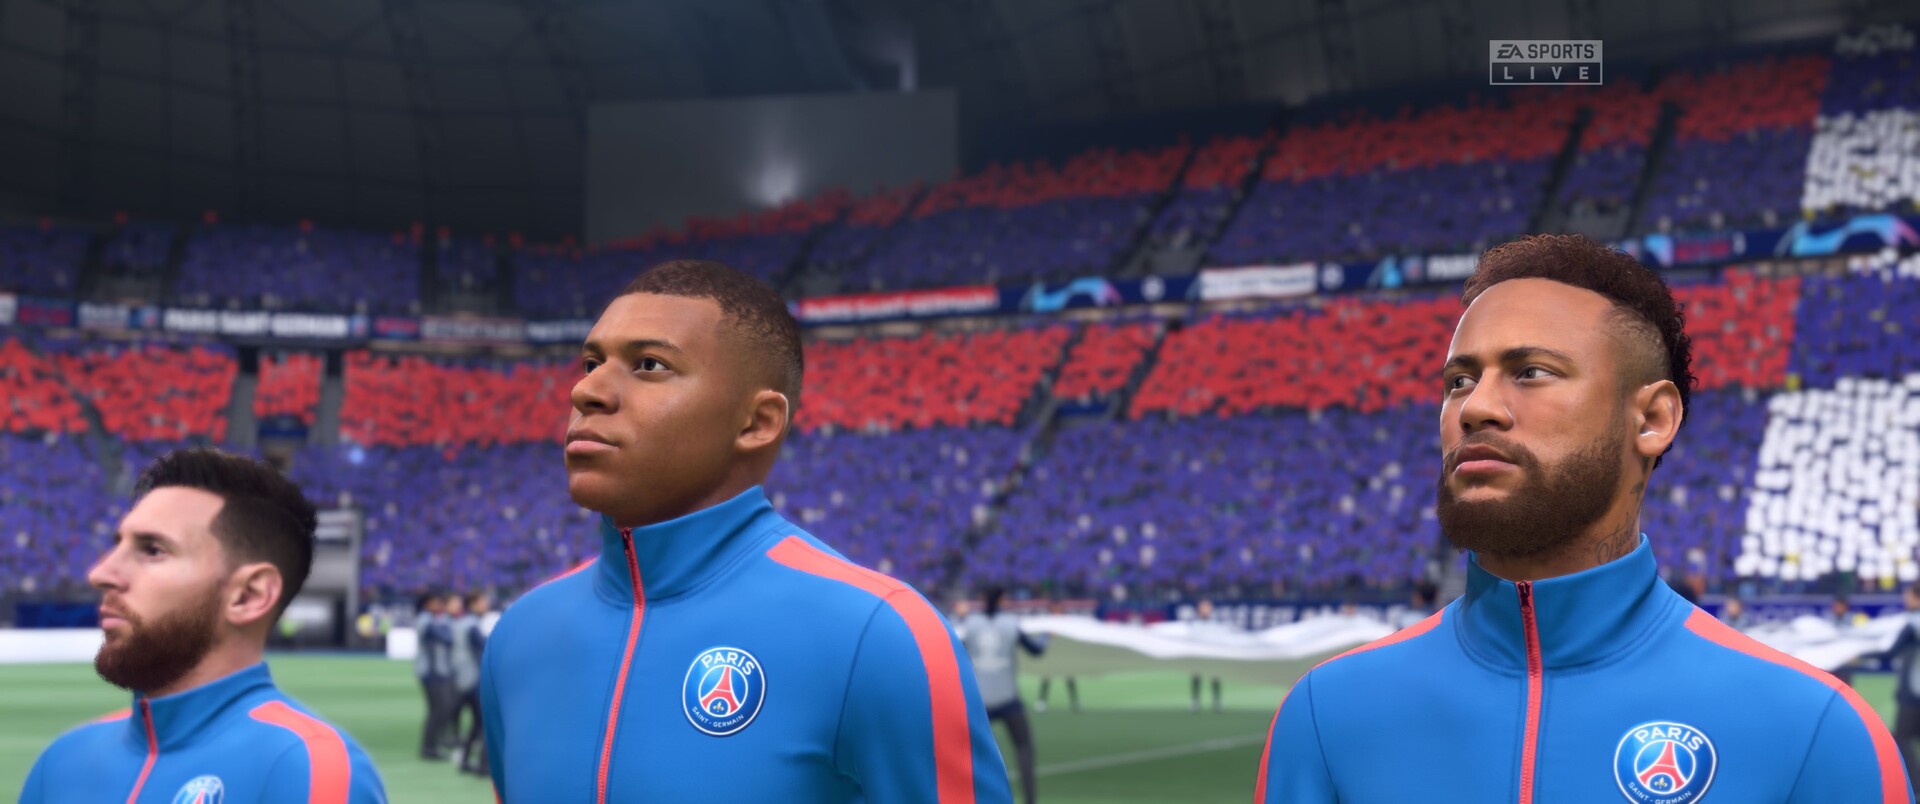 FIFA 22 (PC) - Still top of the league, with incremental PC improvements 